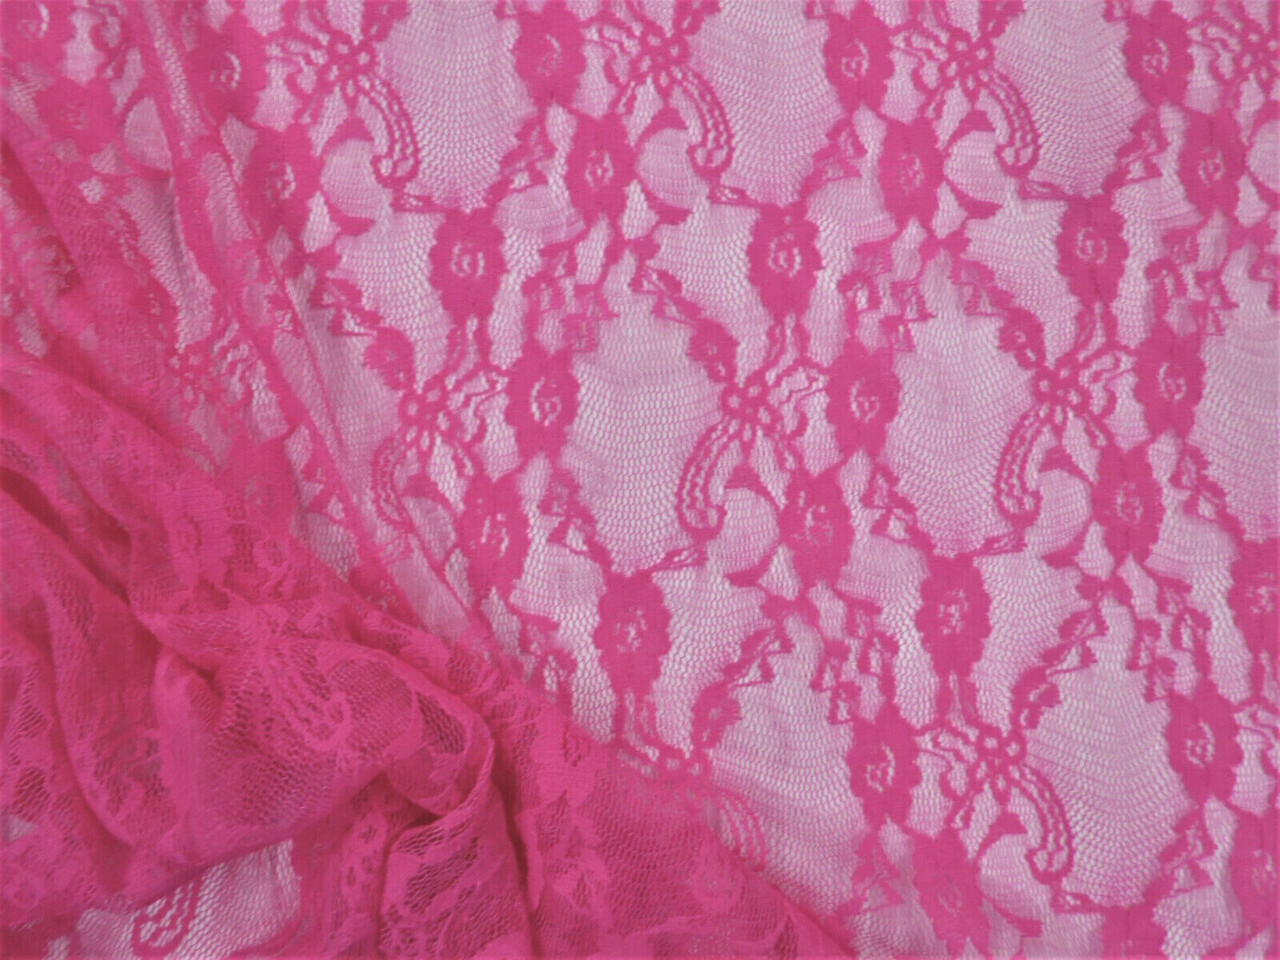 Stretch Lace Apparel Fabric Sheer Floral Lattice Pink CC200